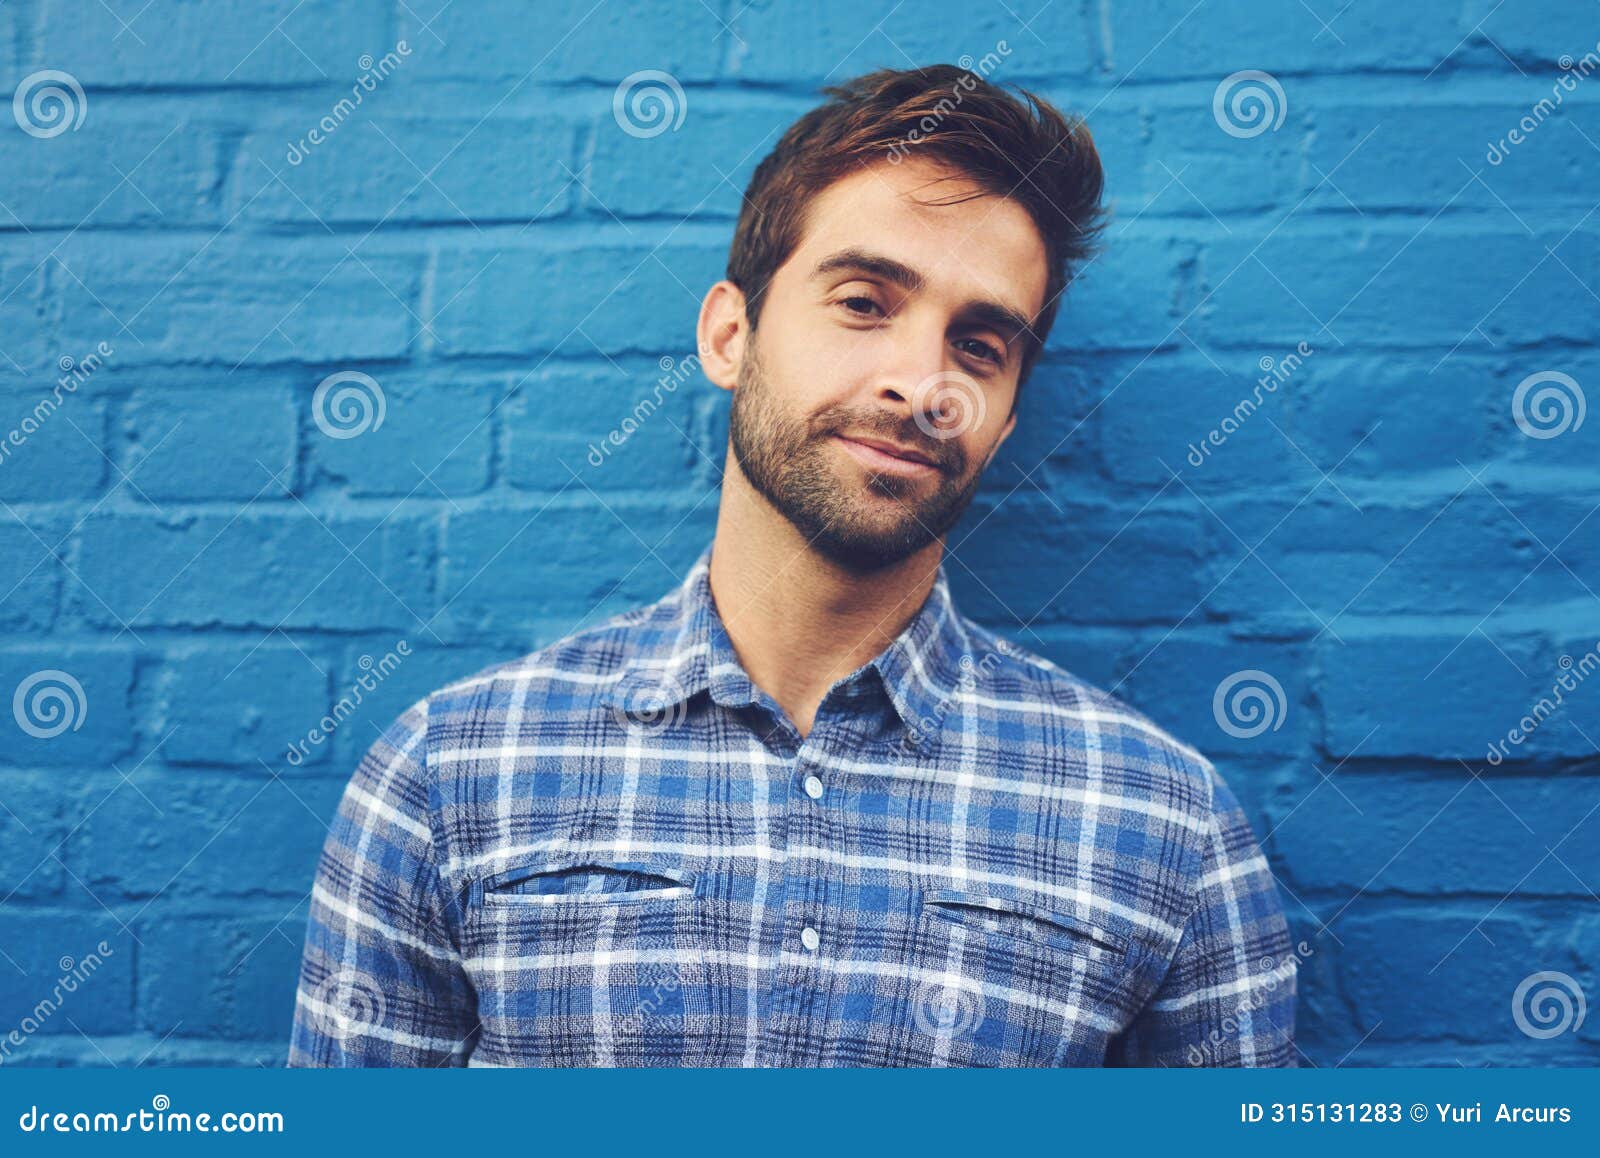 man, confident in portrait and relax on wall background, casual fashion and positivity with blue aesthetic. cool smirk